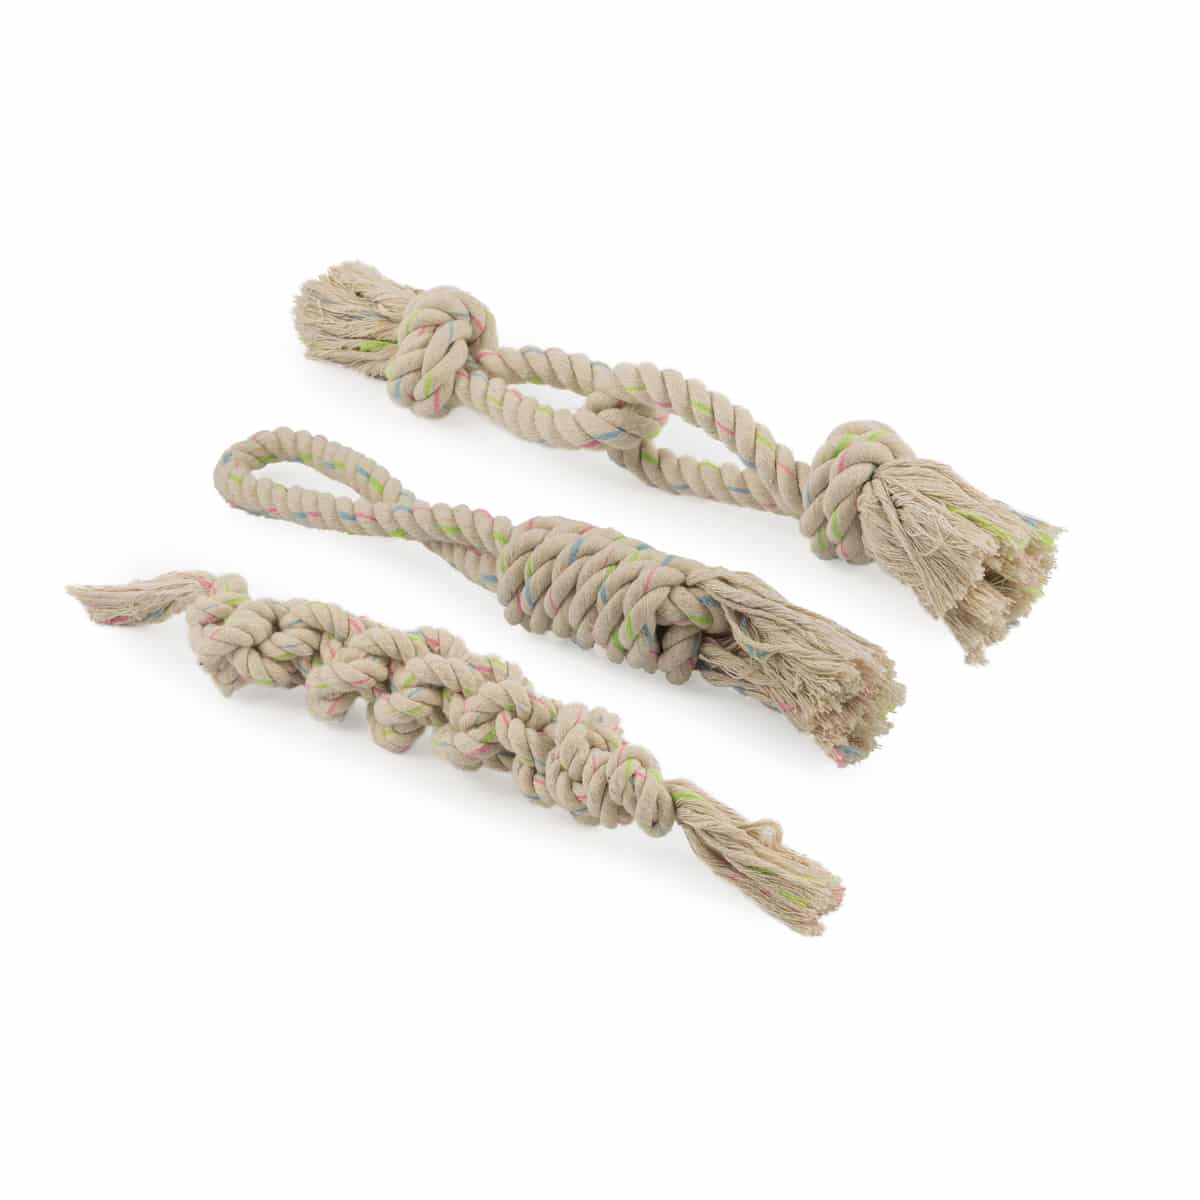 Puppy Teething Chew Toys Include Candy Cane 4 Pieces Cotton Rope Dog Toys Cotton Knotted Rope Interactive Christmas Dog Chew Toys Stocking Stuffers Rope Toys for Small Medium Dogs 